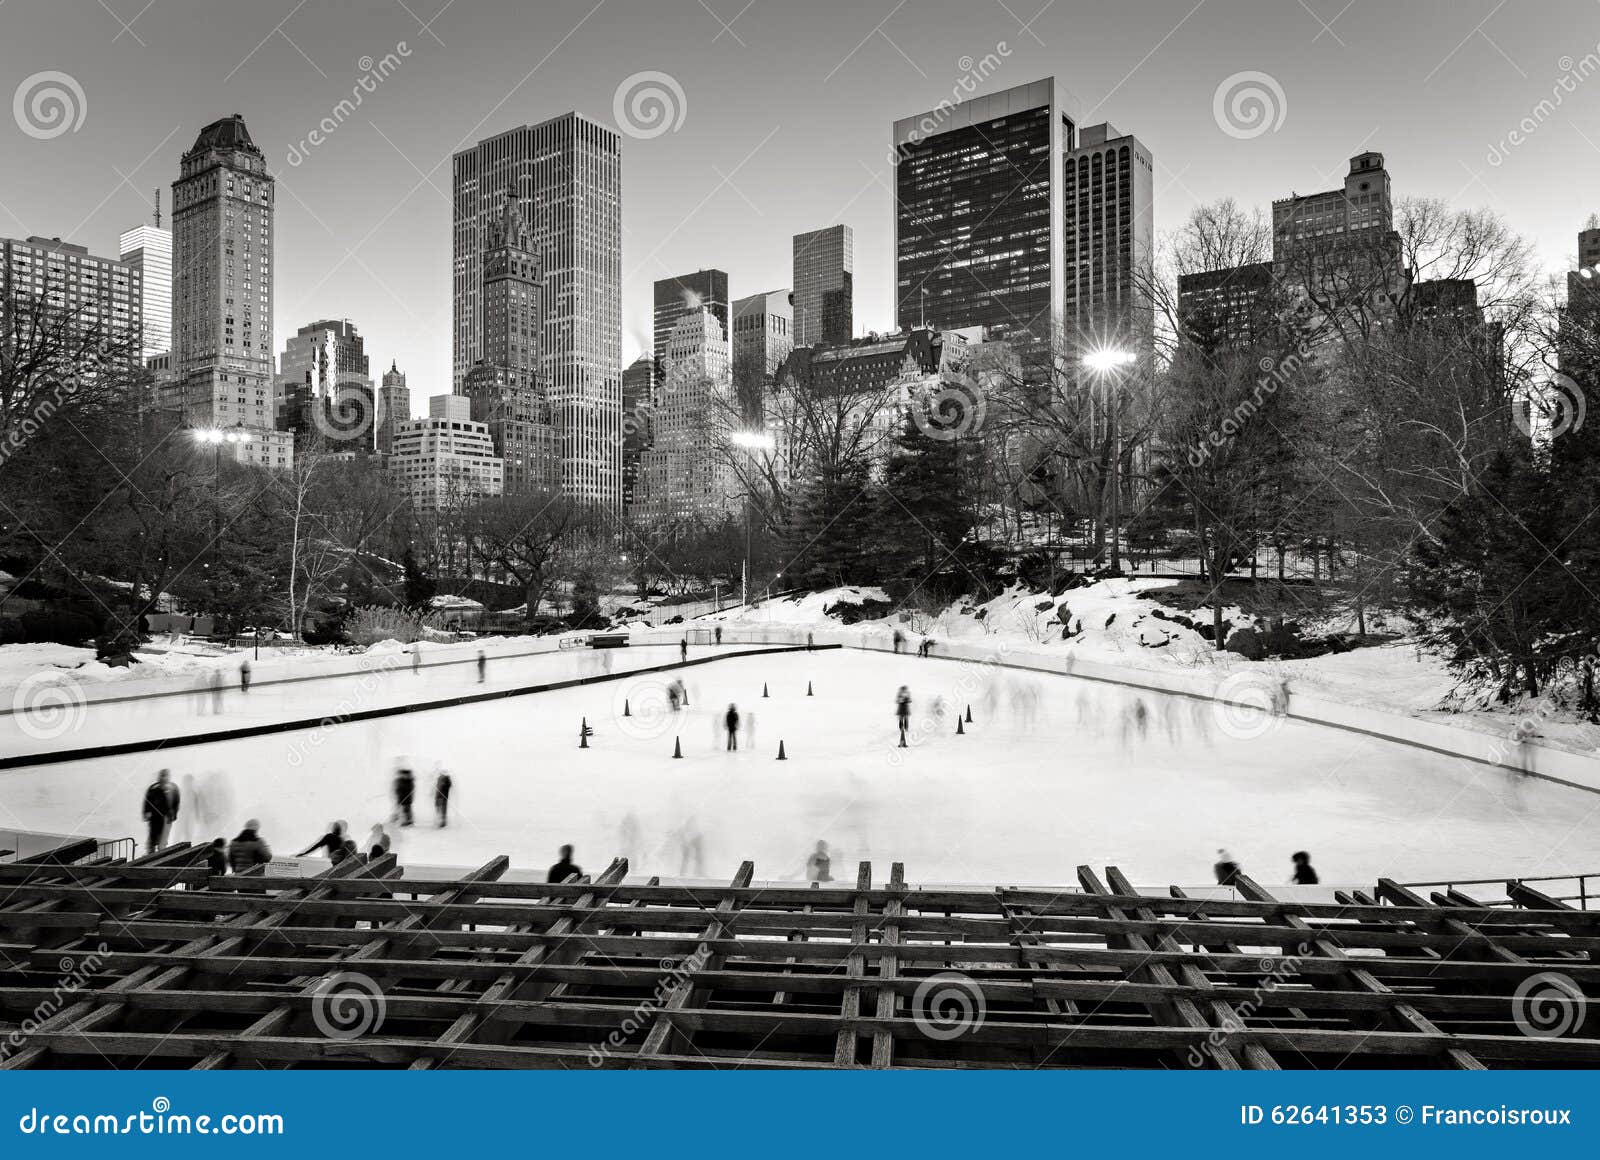 Wollman Rink, Central Park, New York City At Night Stock Photo ...